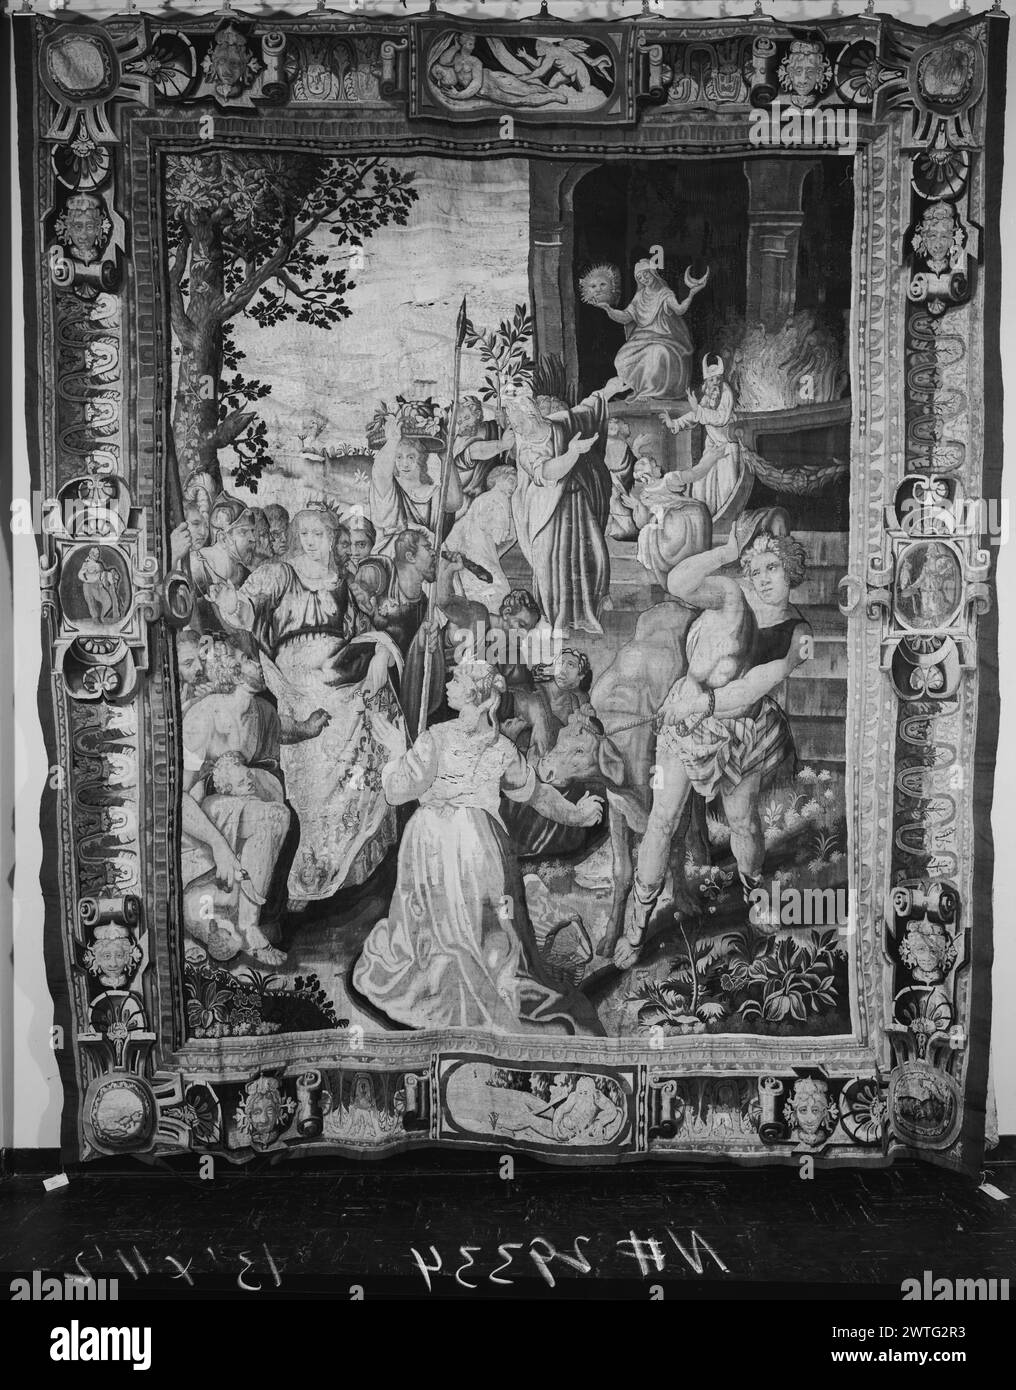 Niobe dissuades people from worshiping Latona. Dubreuil, Toussaint (French, 1561-1602) (author of design) [painter] c. 1630 Tapestry Dimensions: H 13' x W 11' 2' Tapestry Materials/Techniques: unknown Culture: French Weaving Center: Paris Ownership History: French & Co. (?). Given to the Cincinnati Art Museum by Mr. & Mrs. Harry S. Leyman. United States, Ohio, Cincinnati, Cincinnati Art Museum, accno. 1941.98. Niobe insults the goddess Latona & opposes her religious cult; Latona, seated in upper R, holds the sun of Apollo & the moon of Diana, priest to R attends a sacrificial fire (BRD) wave b Stock Photo